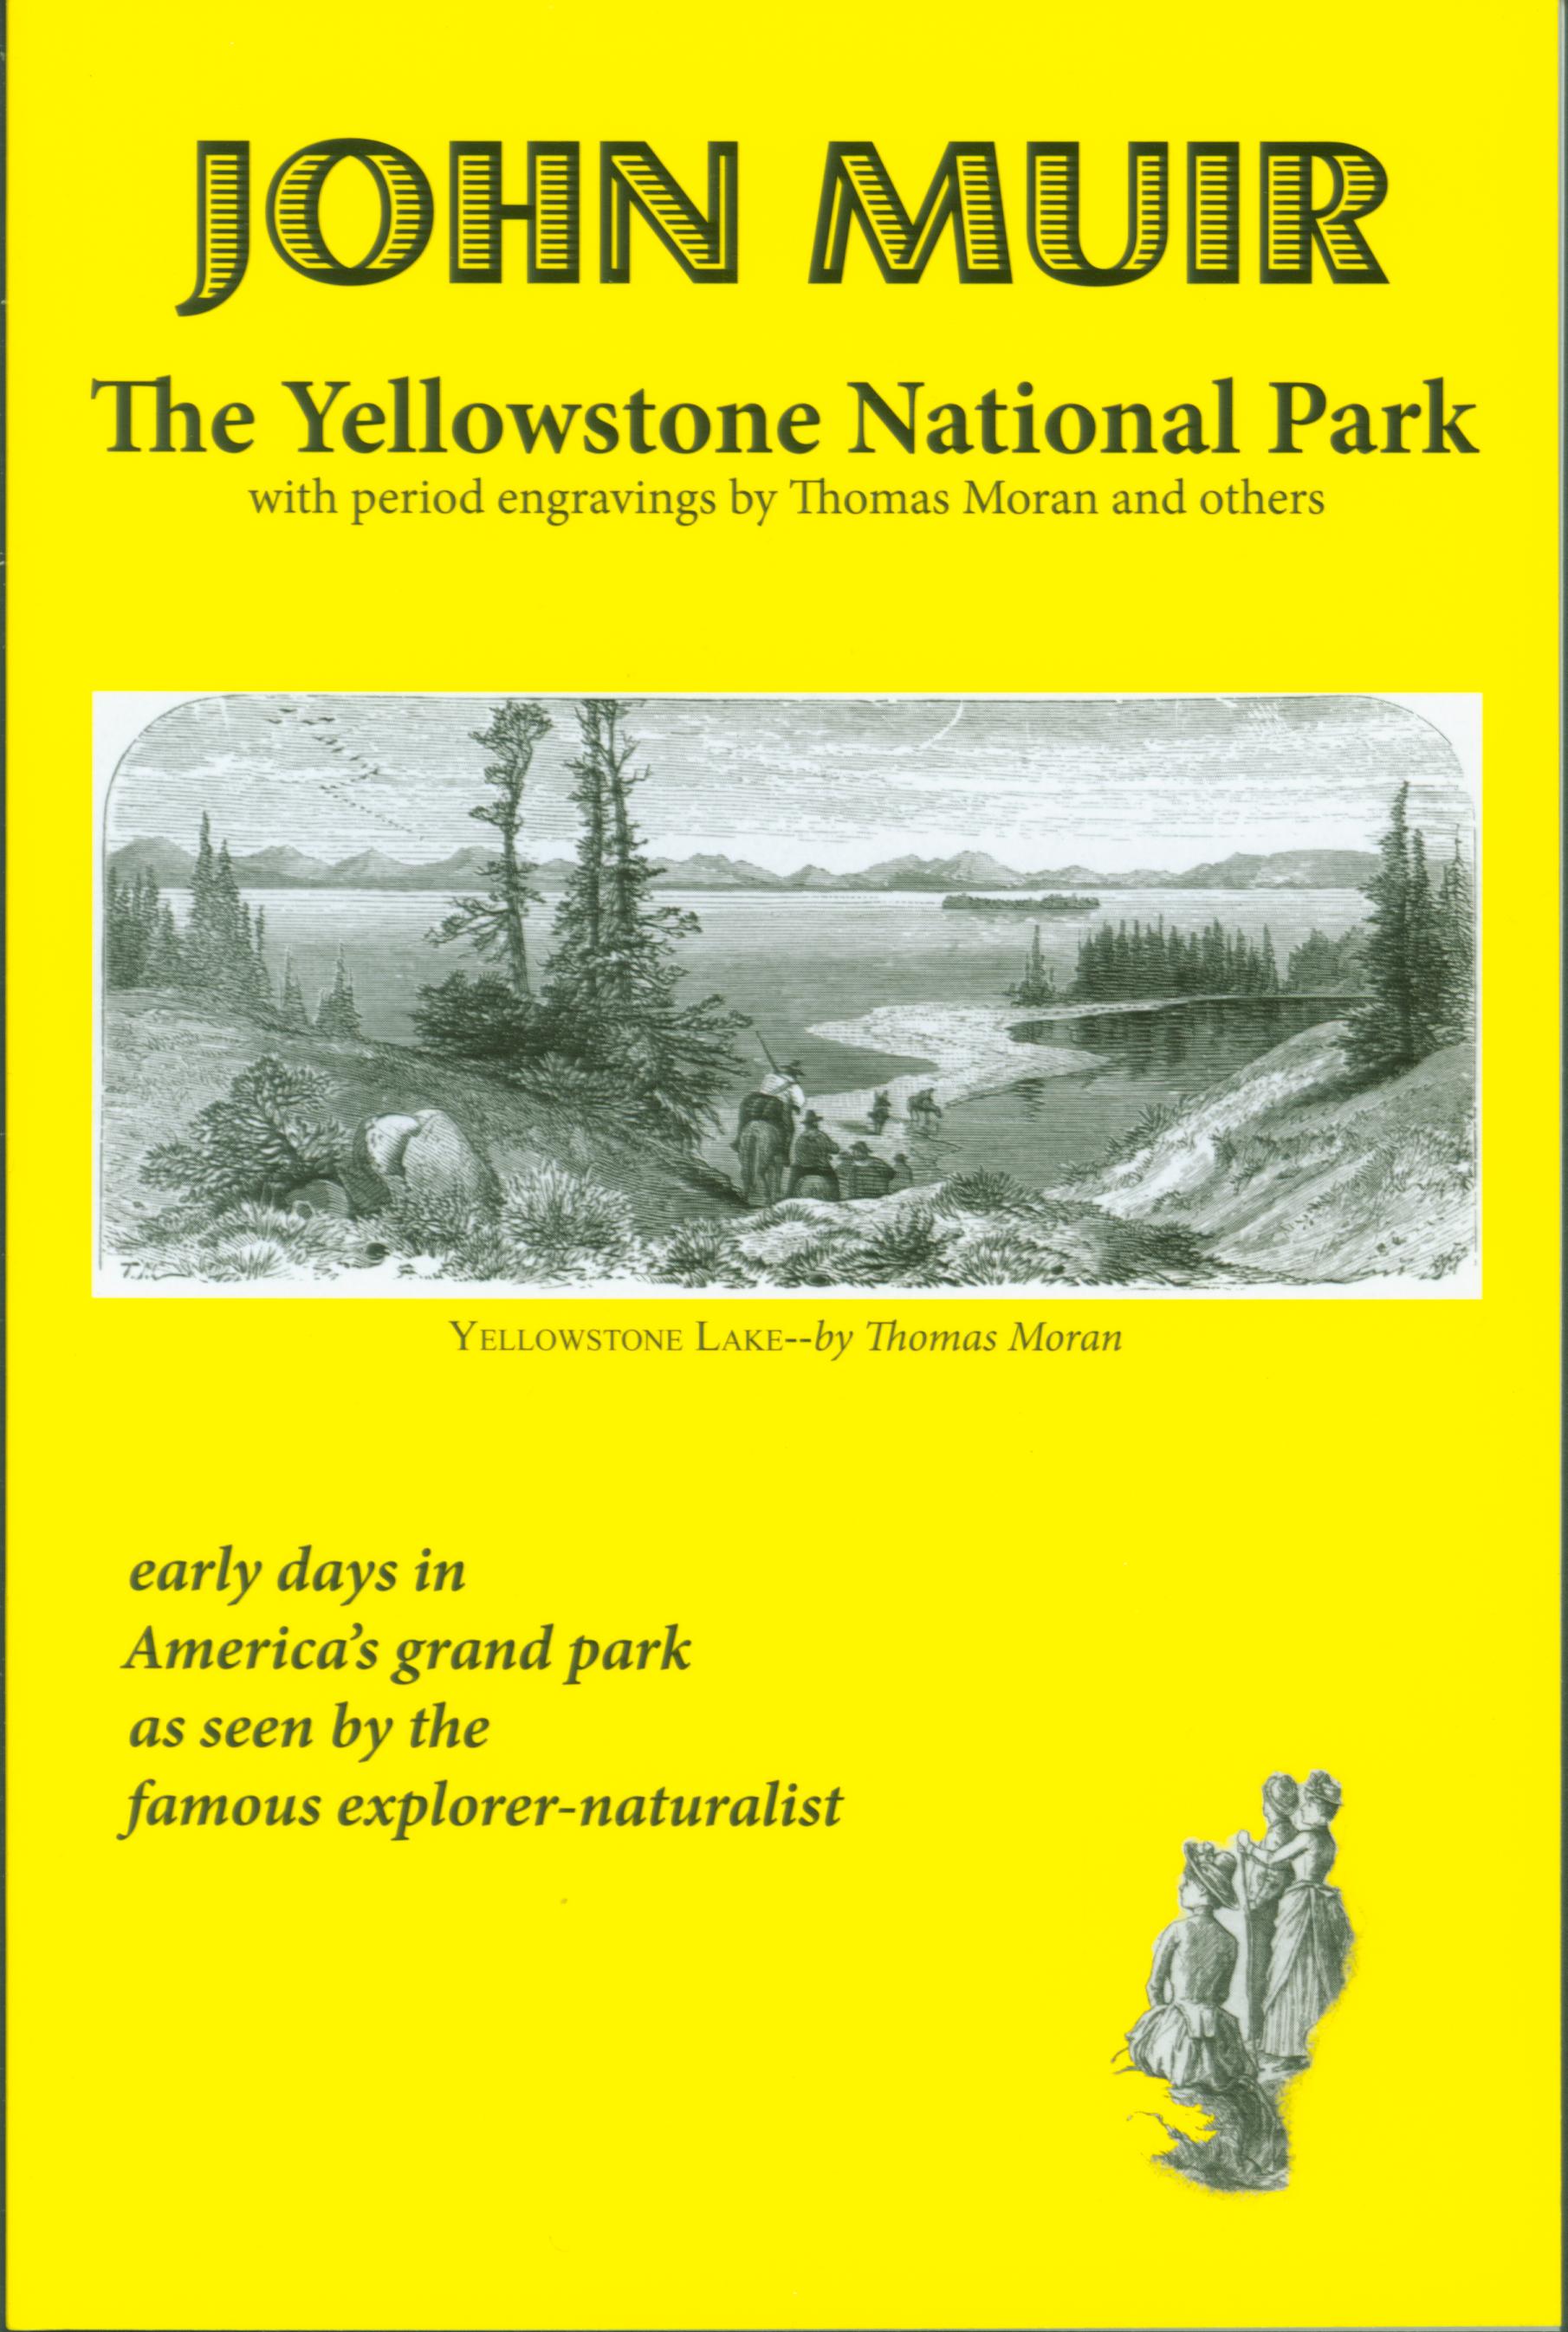 THE YELLOWSTONE NATIONAL PARK (ID/MT/WY). 